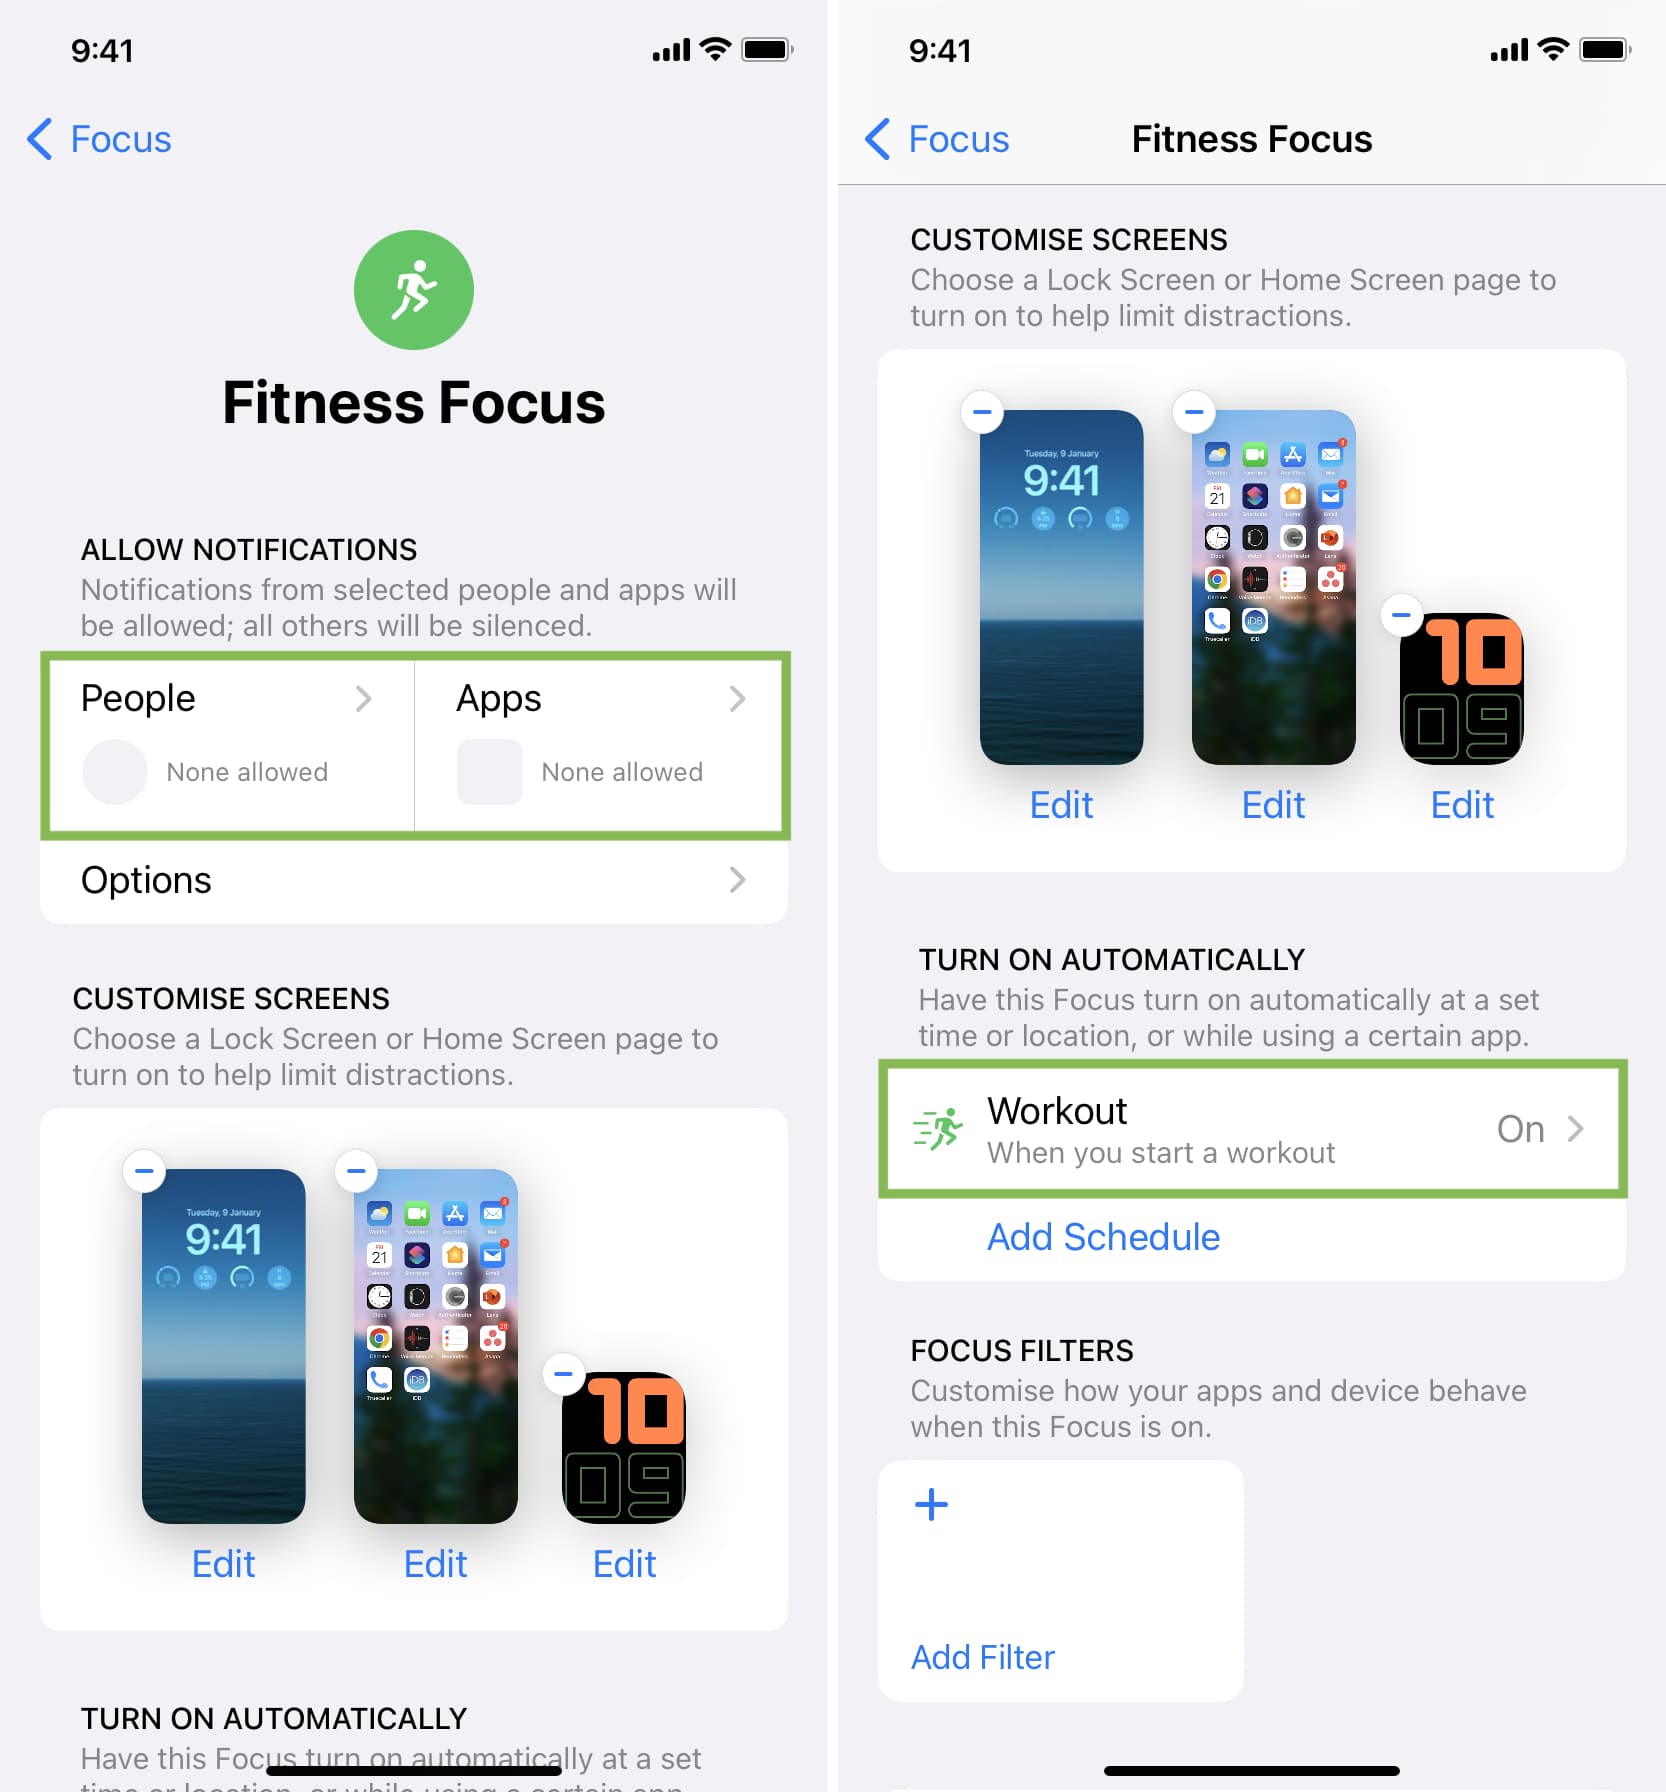 Enable Fitness Focus automatically during workout